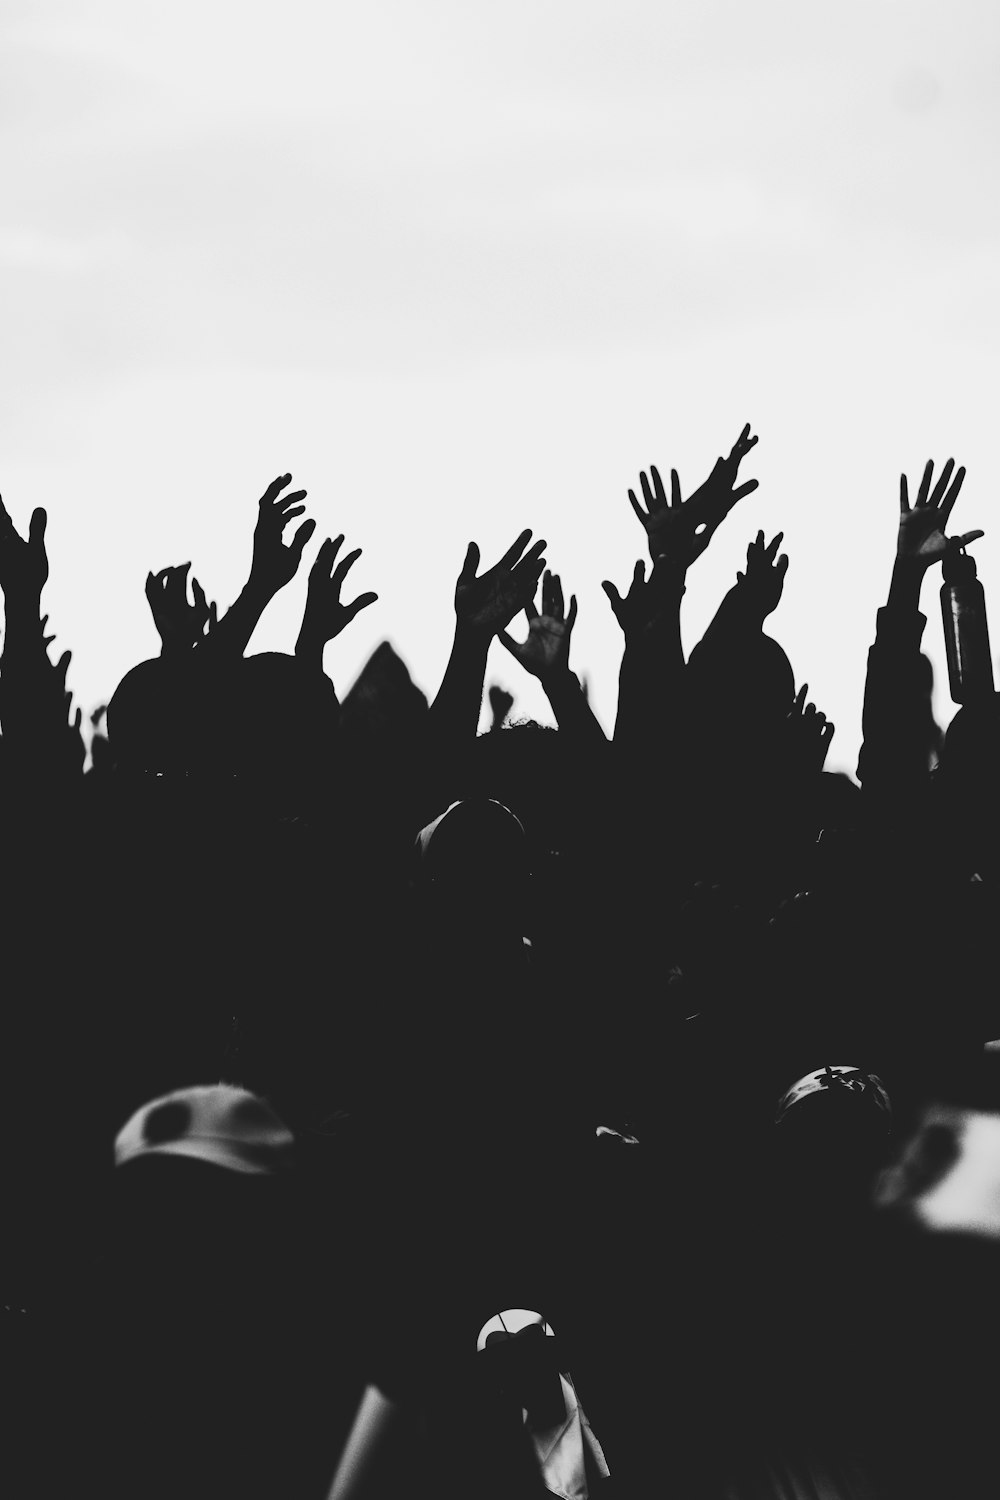 silhouette of people raising their hands